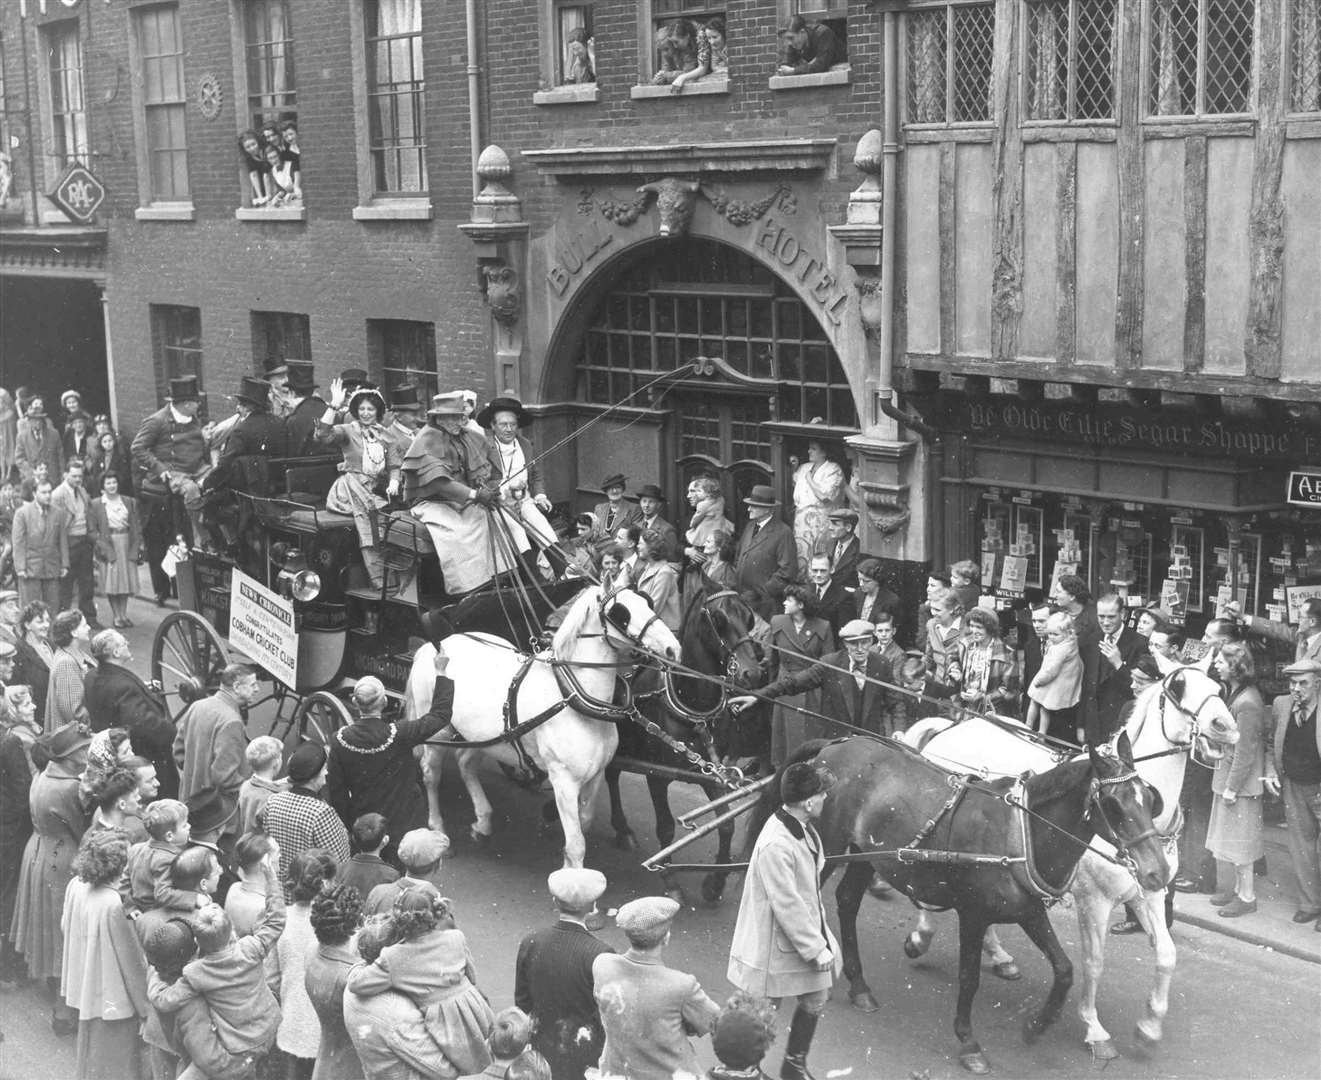 This Dickens coach was assembled to celebrate the centenary of Cobham Cricket Club in 1950 and is seen arriving at the Bull Hotel, Rochester, which figures in Pickwick Papers